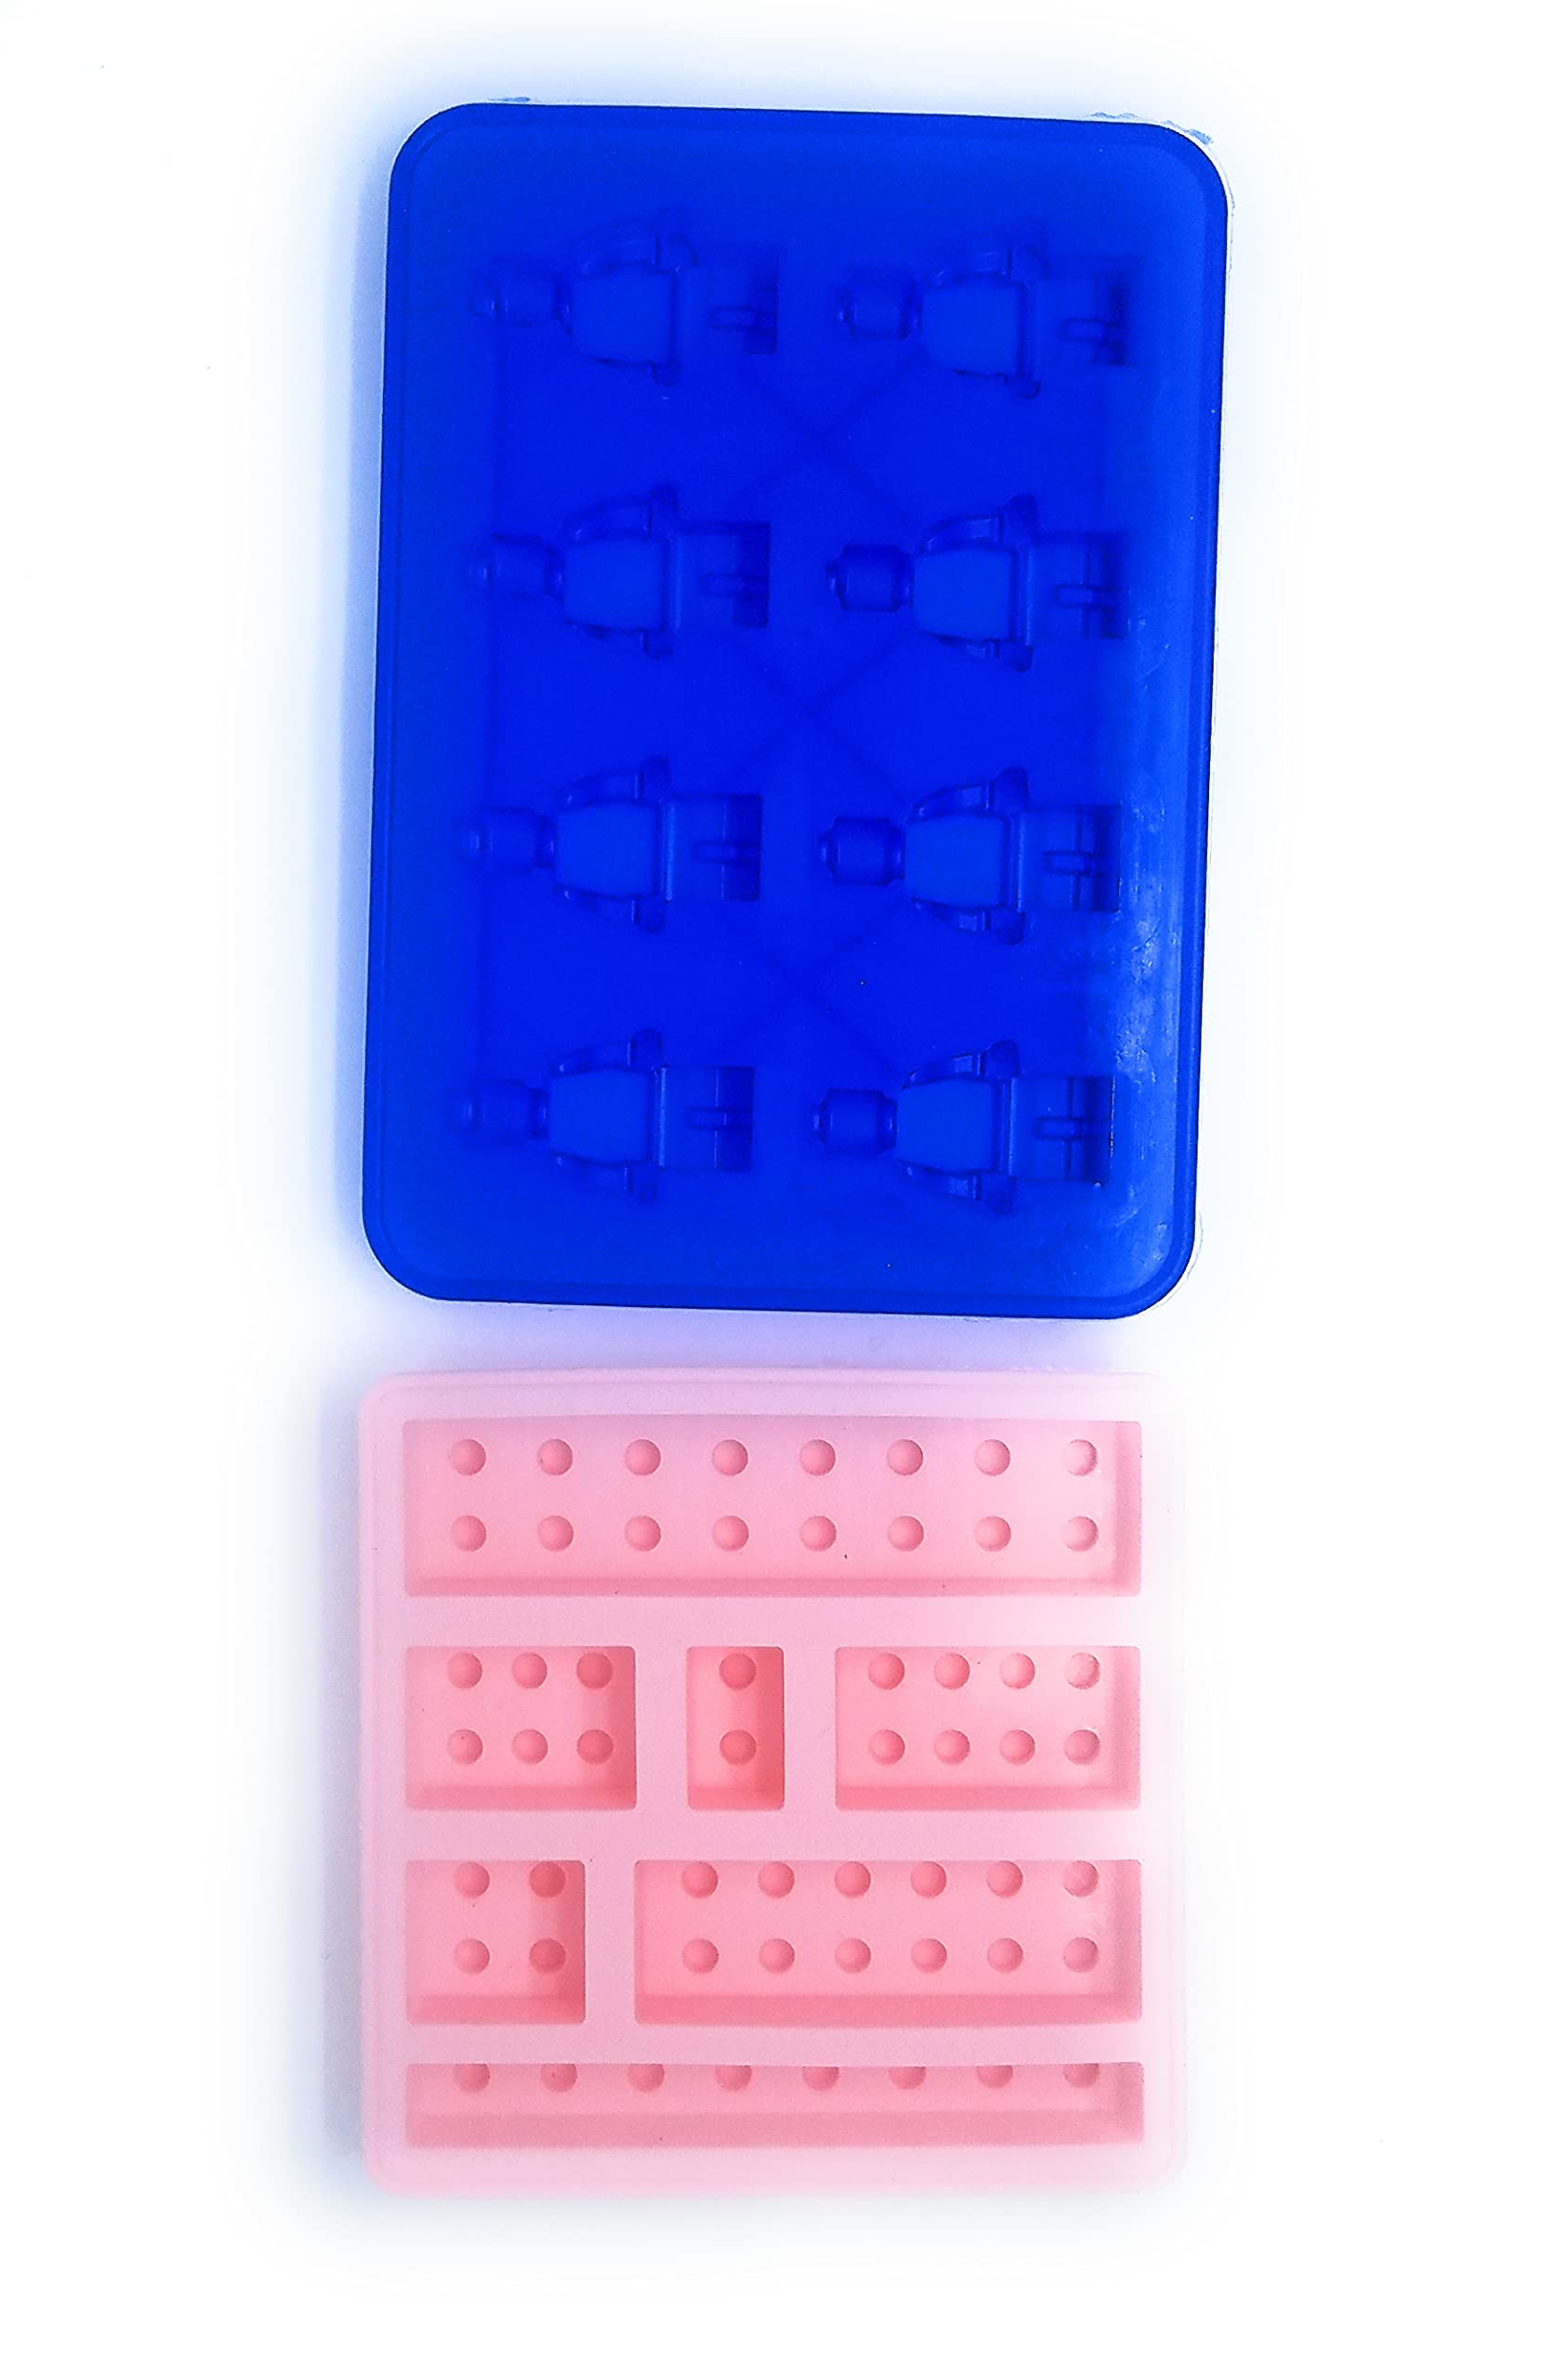 Lego Mini figure Silicone Mold for Making Gummy Candy Chocolate Soap Resin Jelly Ice-cubes Snack Biscuits - 8 cavities